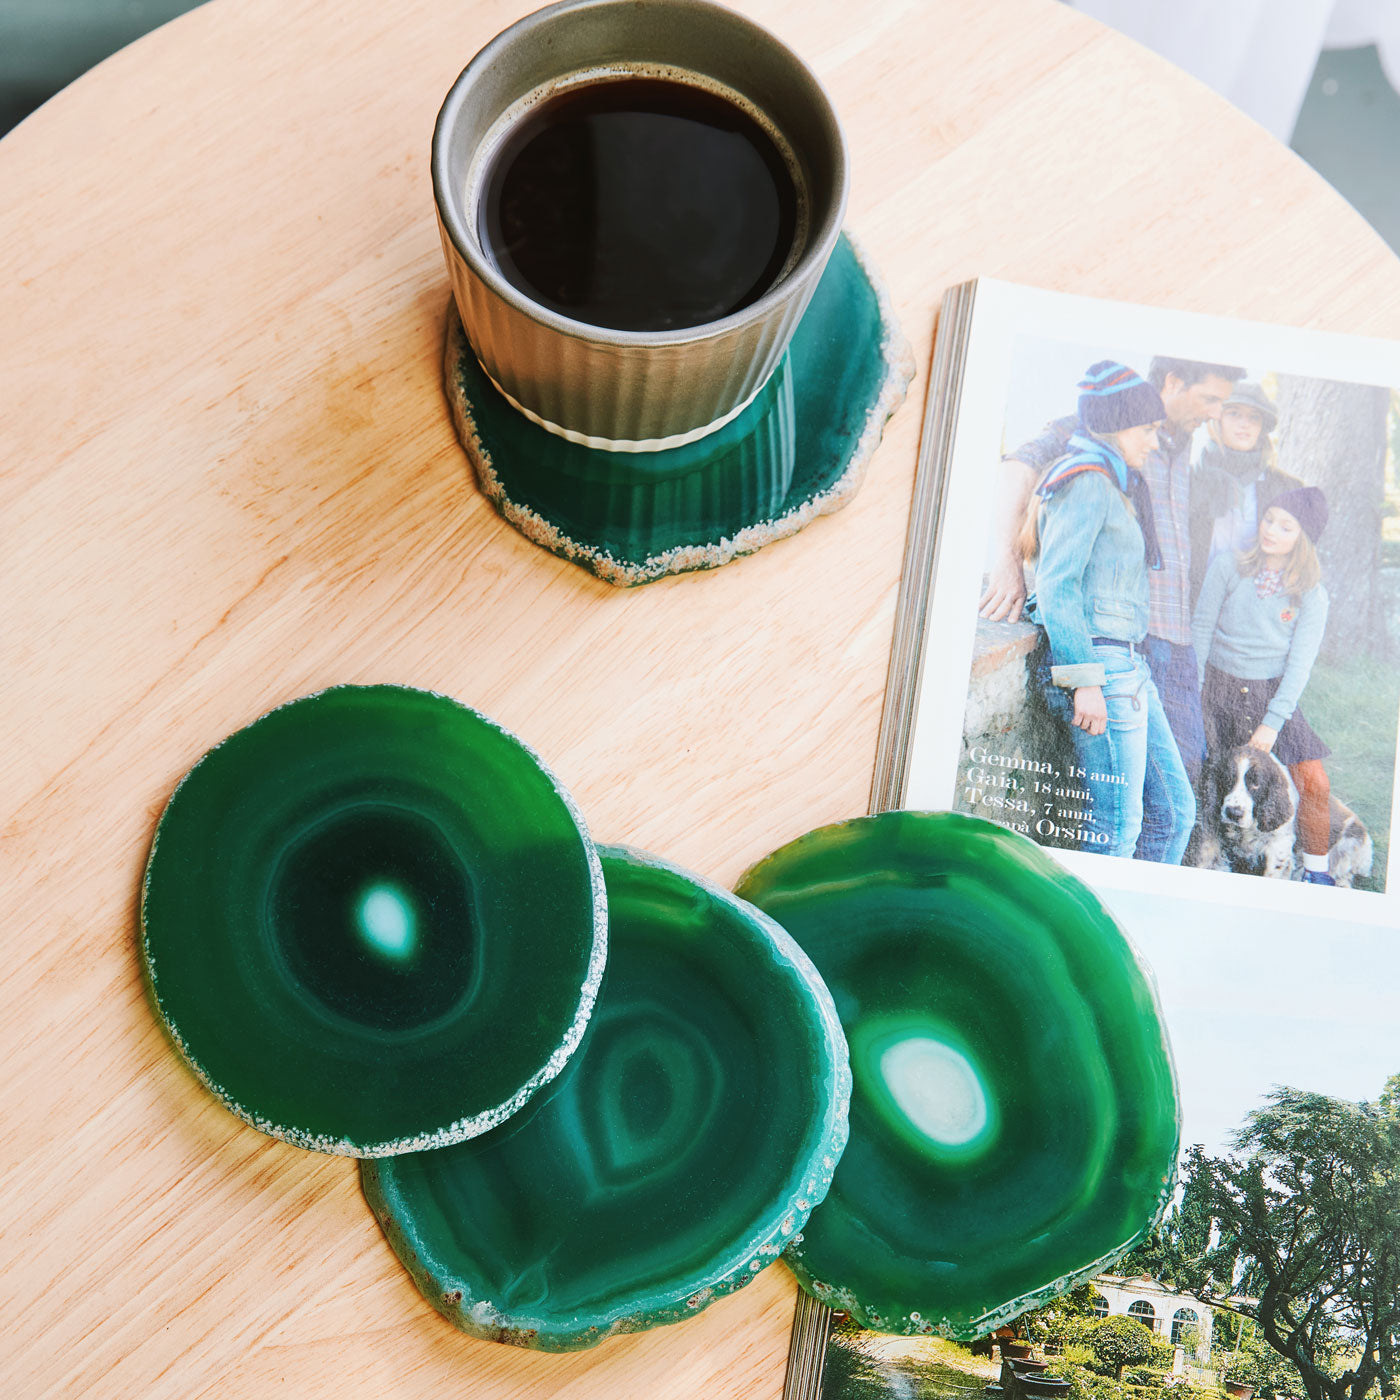 Set of 4 Natural Brazilian Agate Drink Coasters with Wood Holder - Emerald